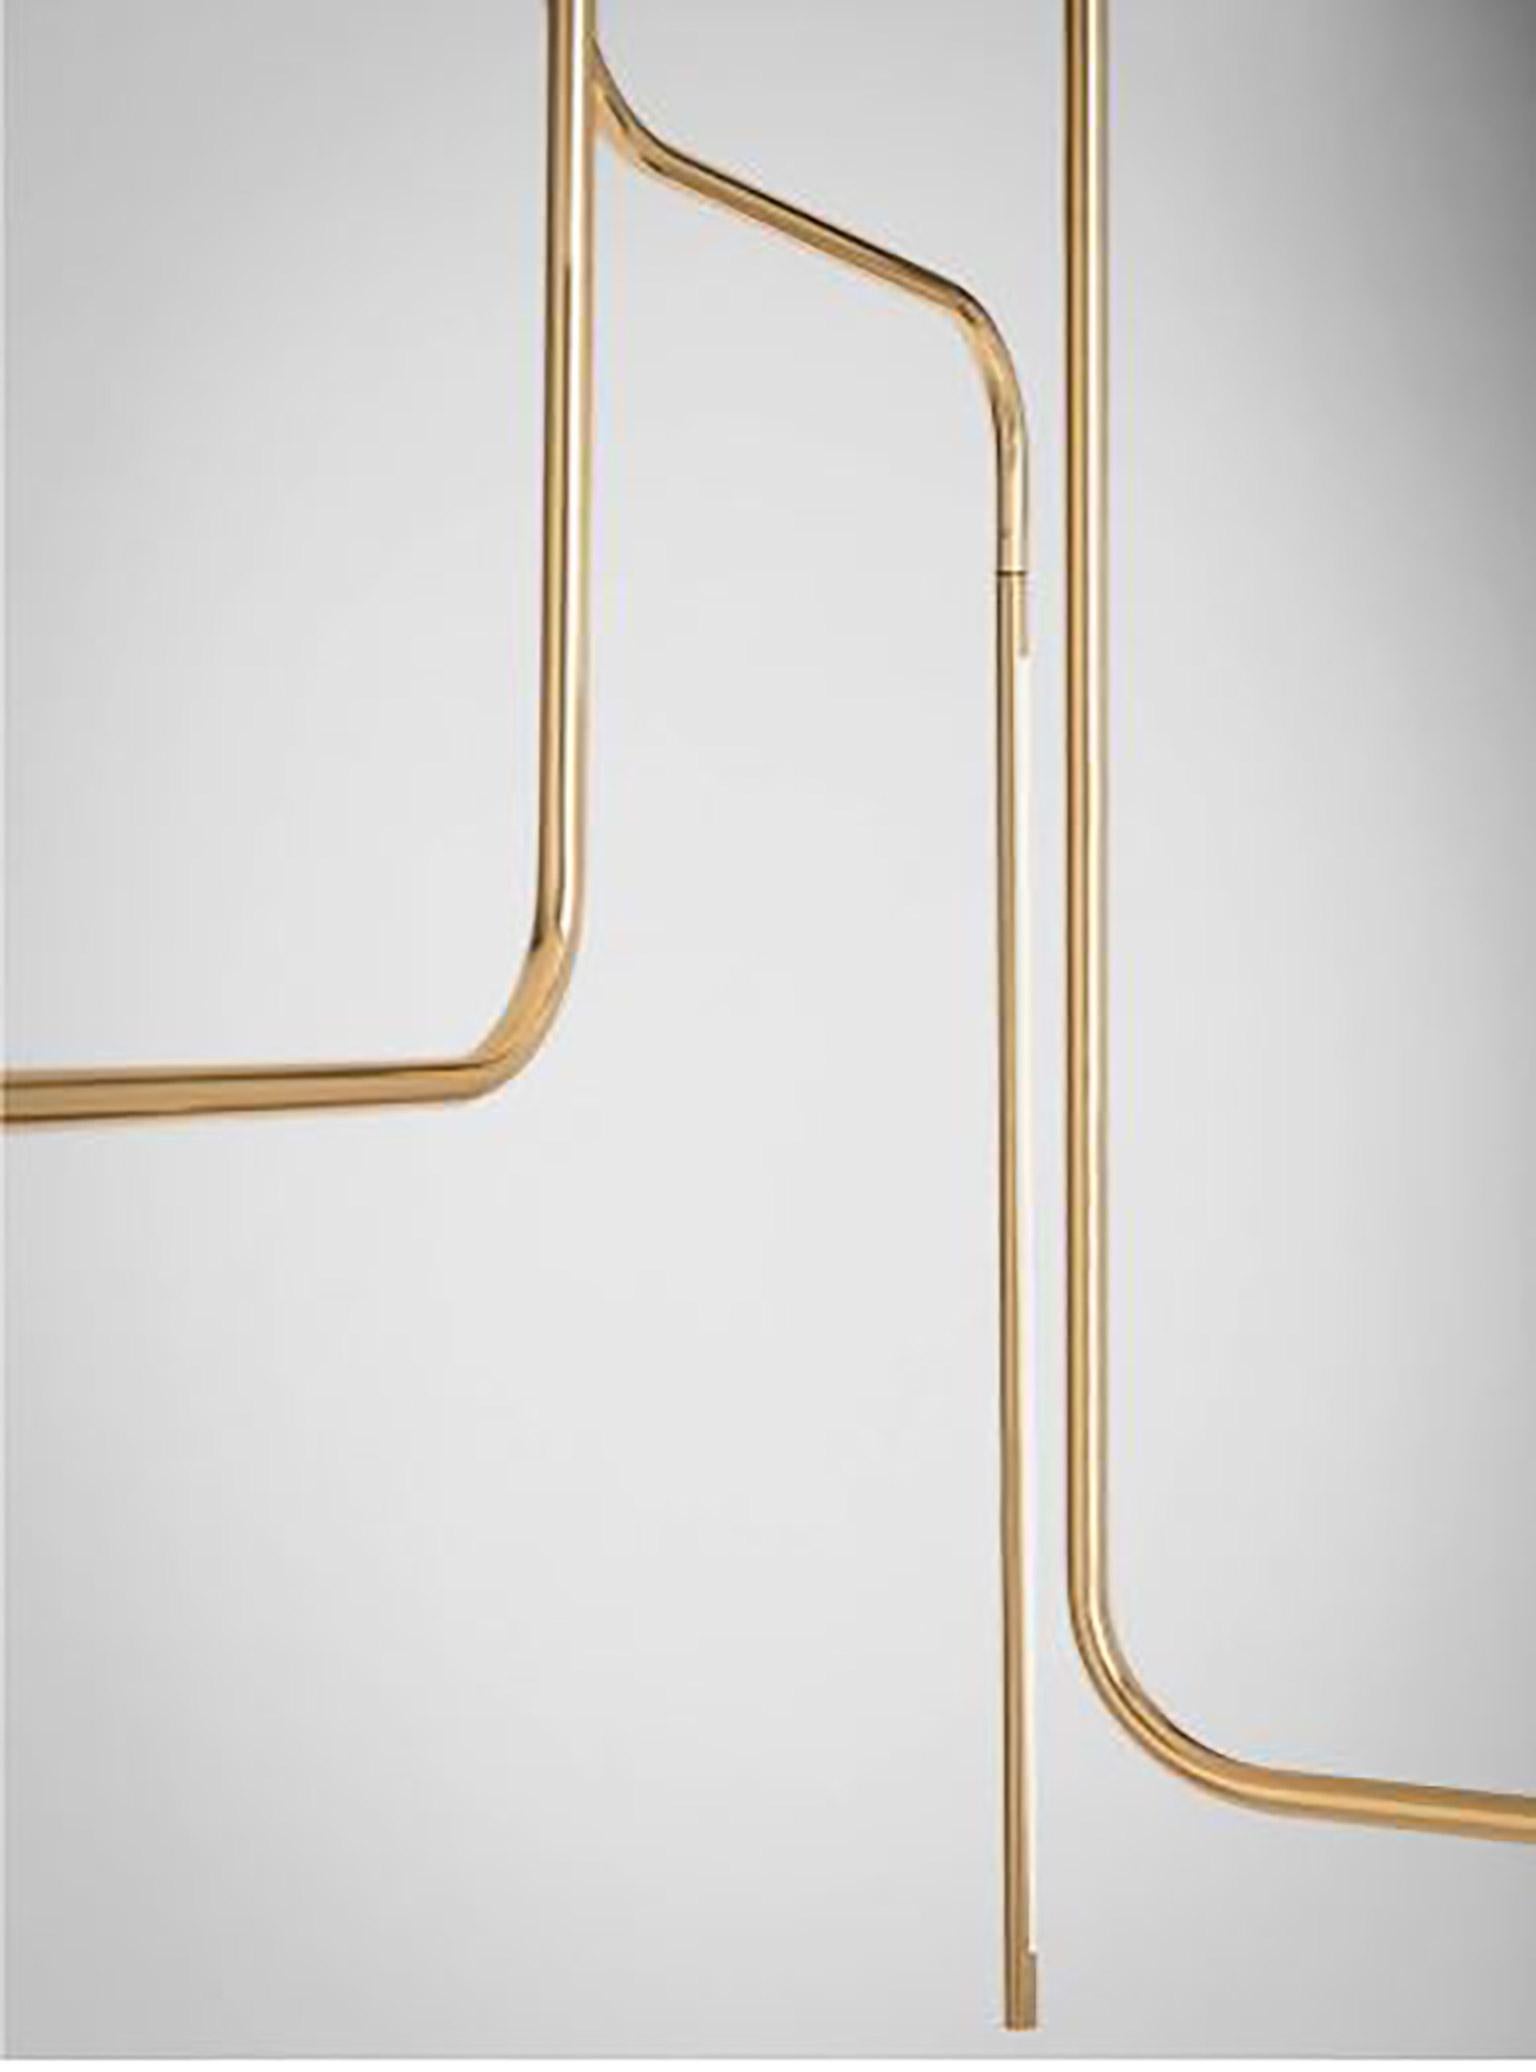 SEM Gold collection, three arms composition ceiling lamp in polished or fine brushed tubular brass with double joint. Different sizes and compositions : H 110/125/155/175 cm. Horizontal arm length measurement 20 cm. Lamp type LED 6W - 3000°K Voltage